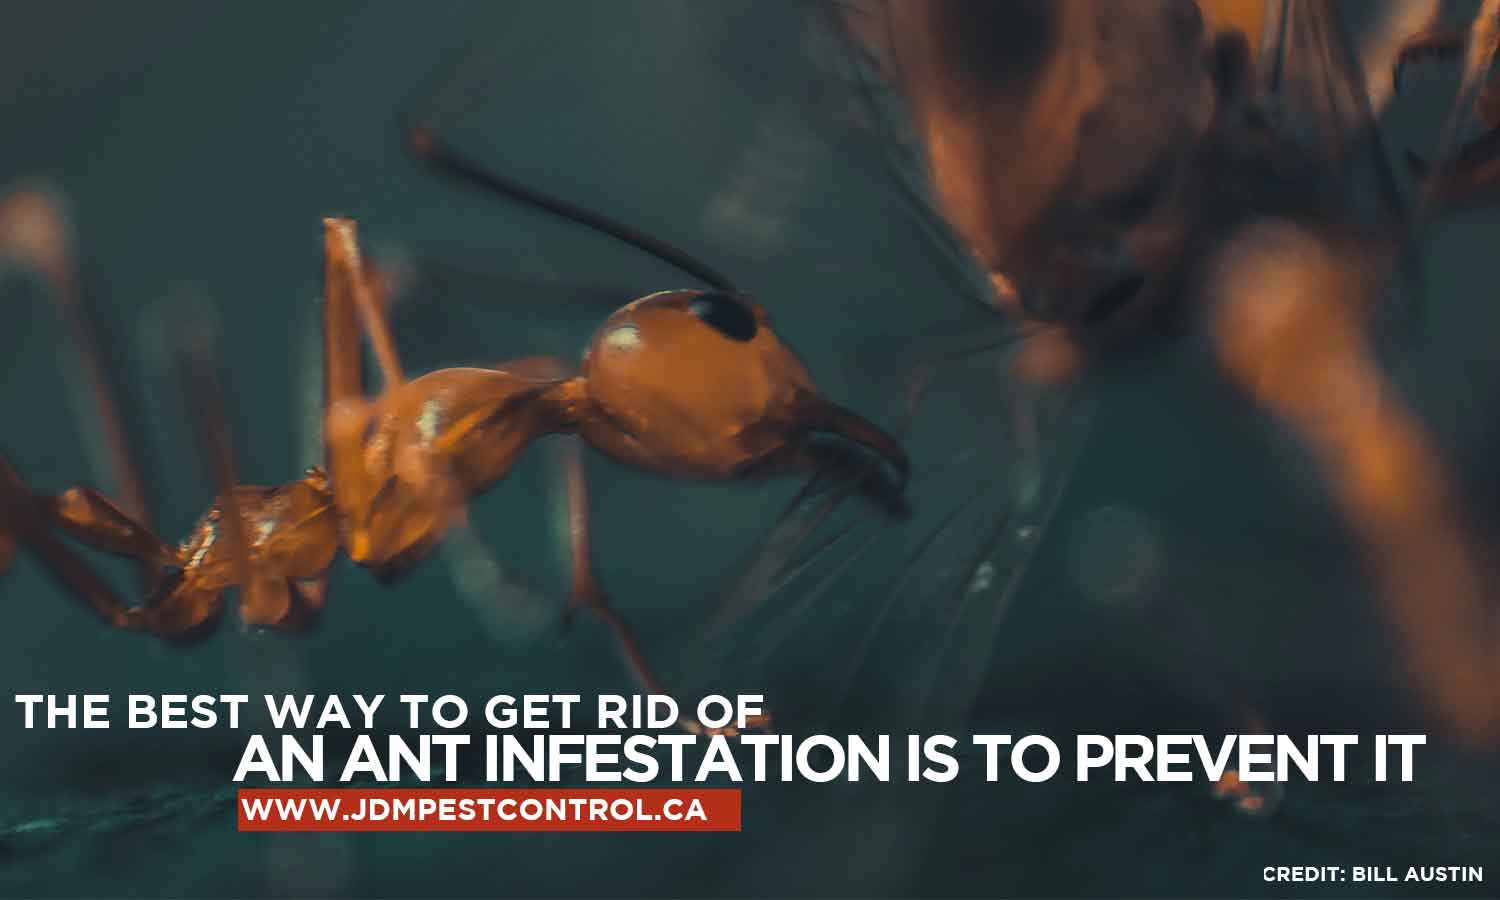 The best way to get rid of an ant infestation is to prevent it